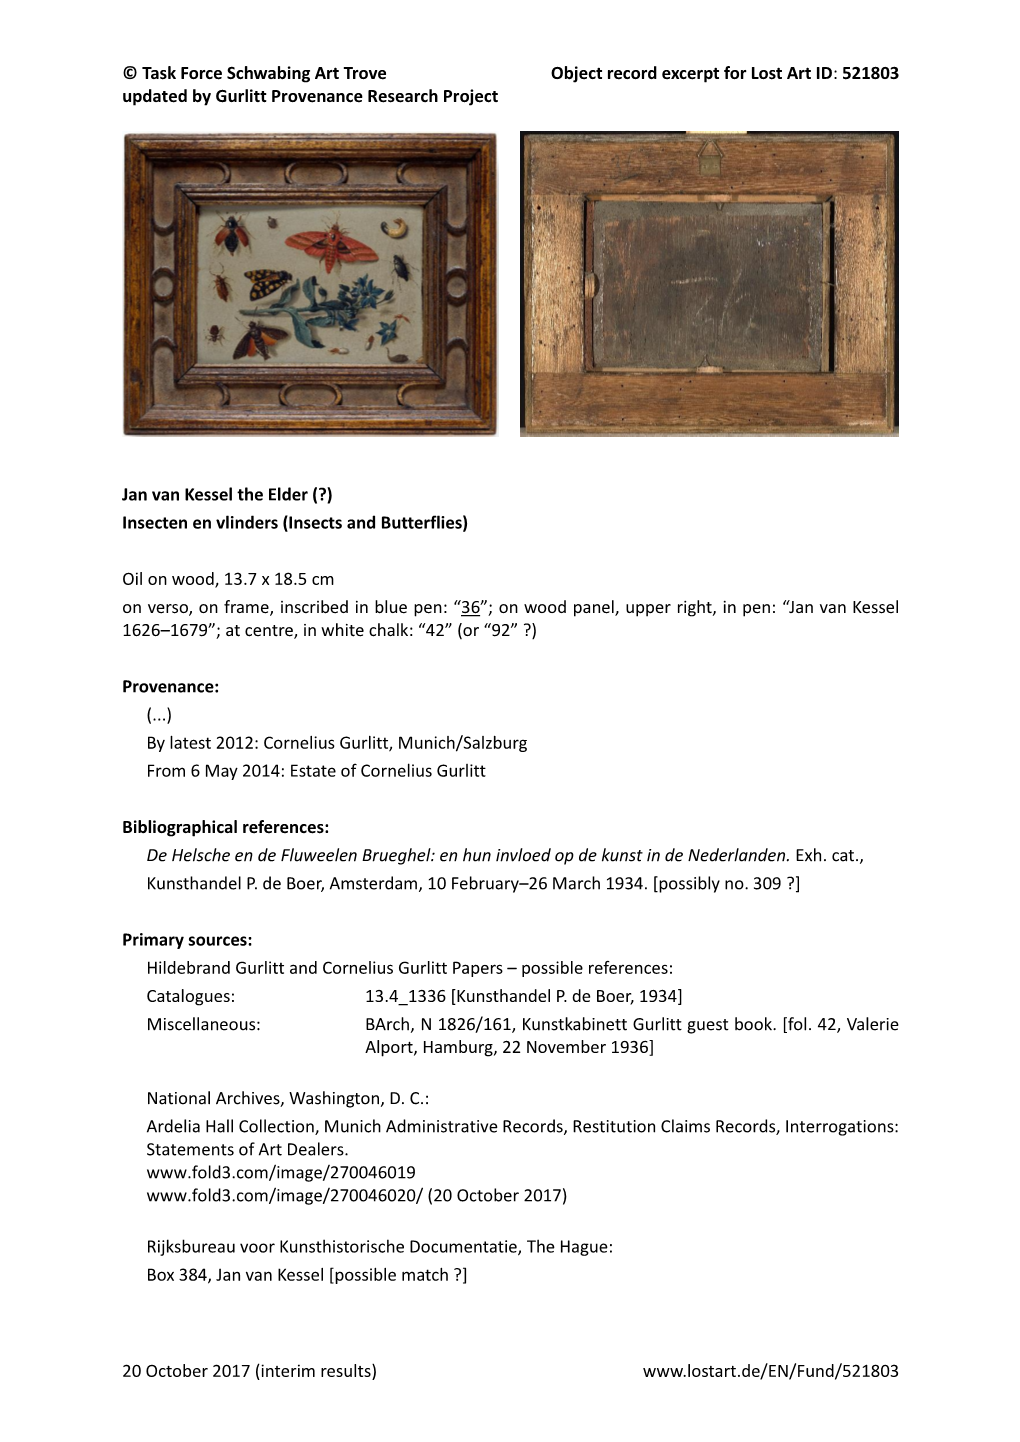 © Task Force Schwabing Art Trove Object Record Excerpt for Lost Art ID: 521803 Updated by Gurlitt Provenance Research Project 2